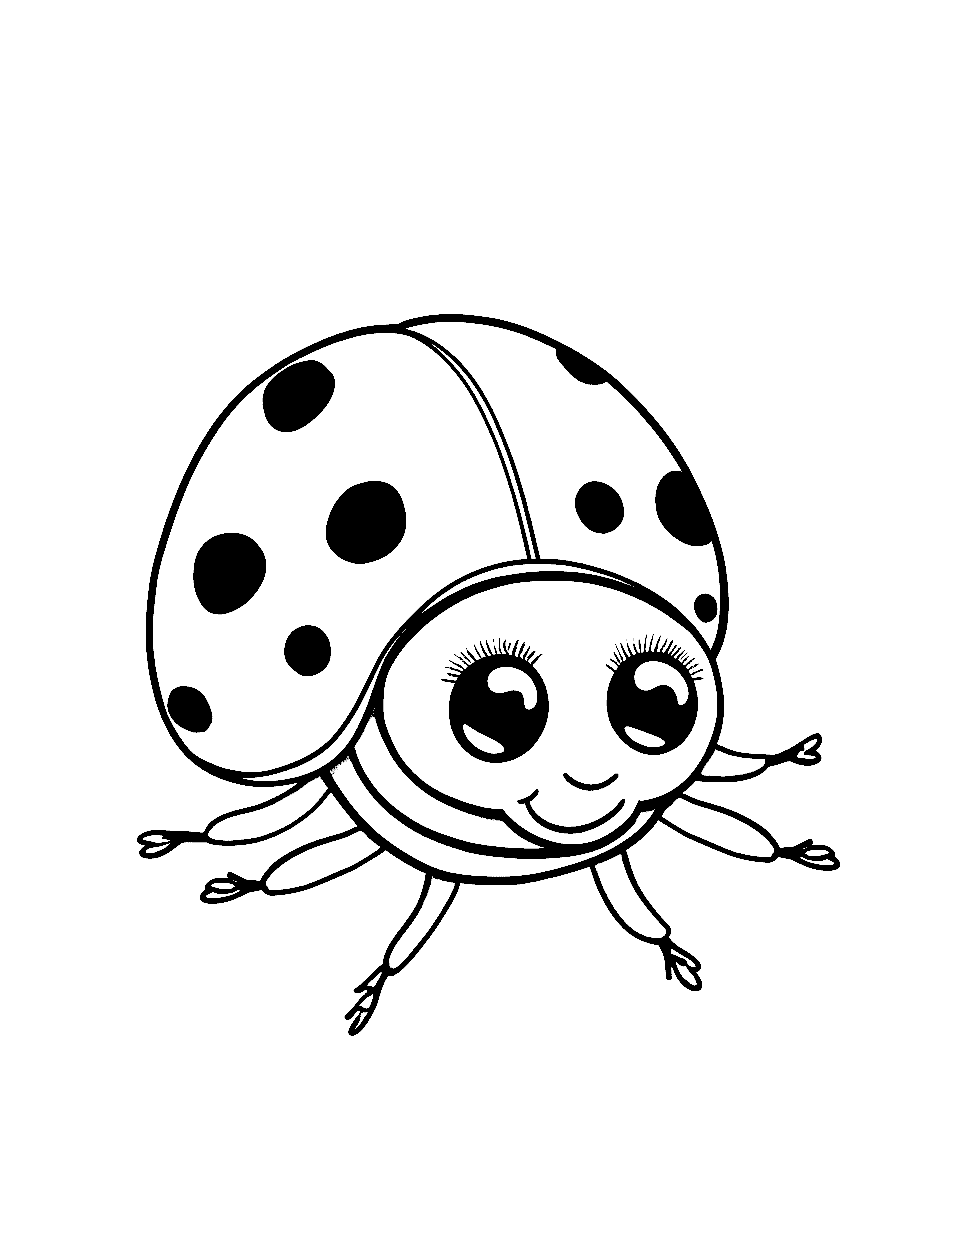 Baby Ladybug's First Steps Coloring Page - A kawaii-style baby ladybug ready to walk for the first time.